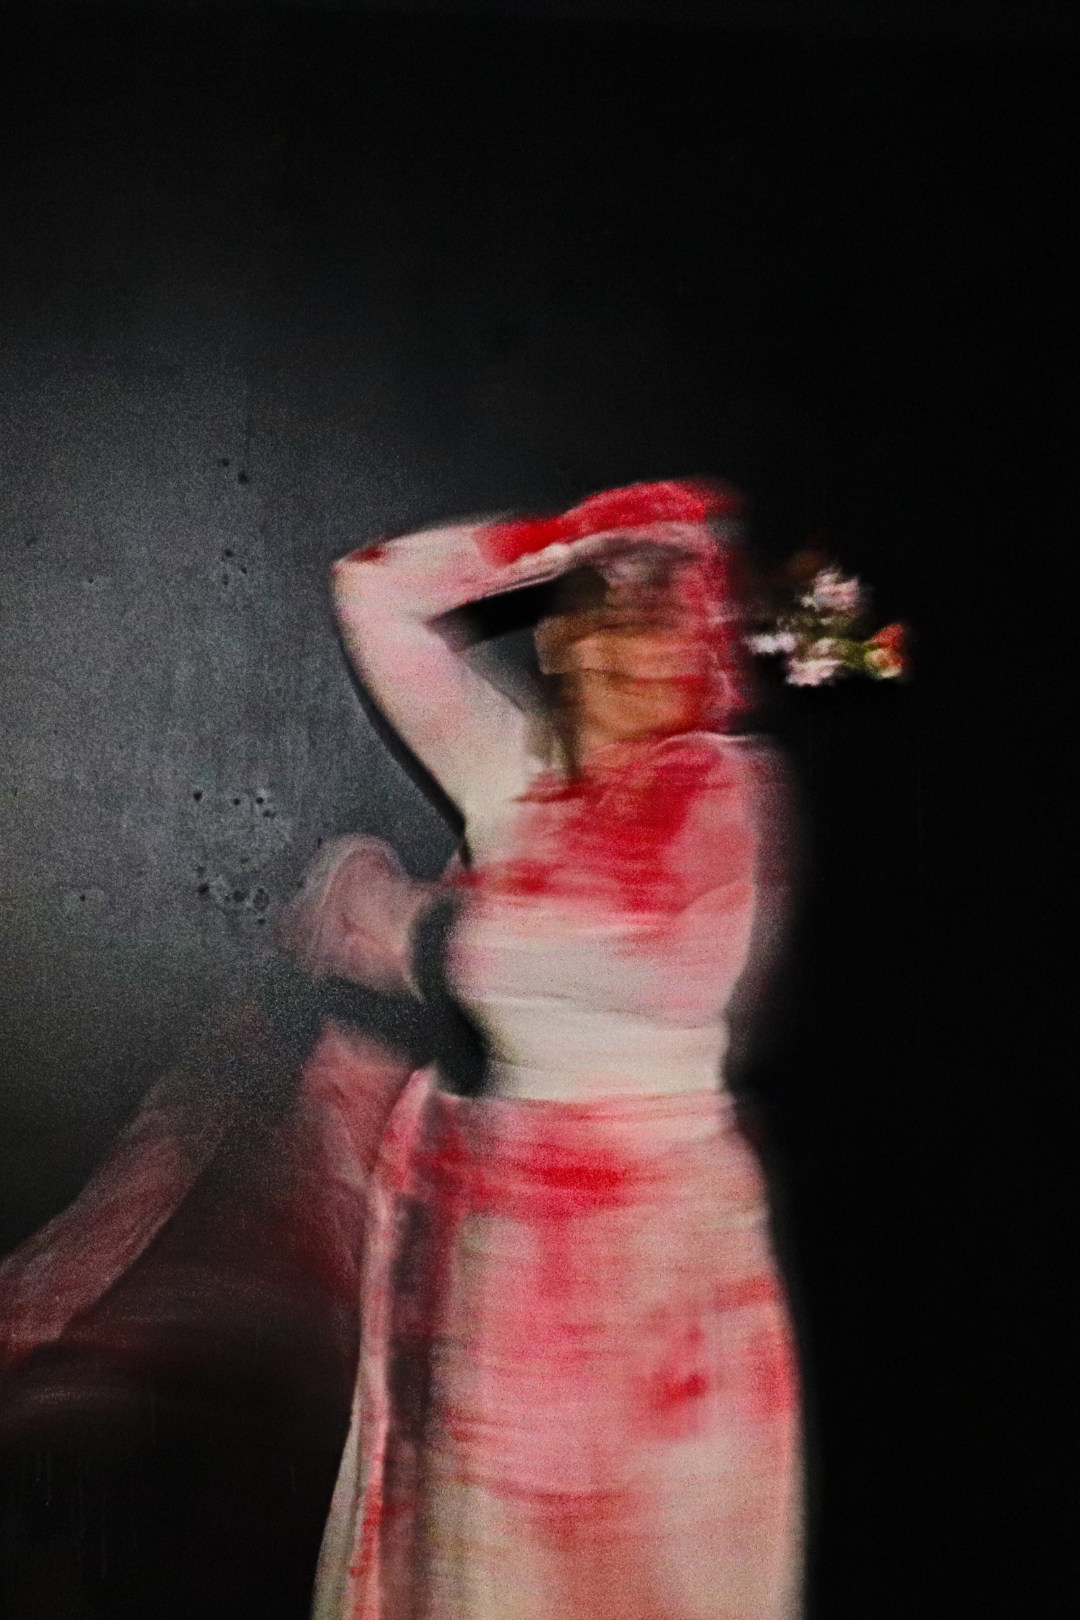 Blurred photo of young woman in white dress covered in red stains holding flowers